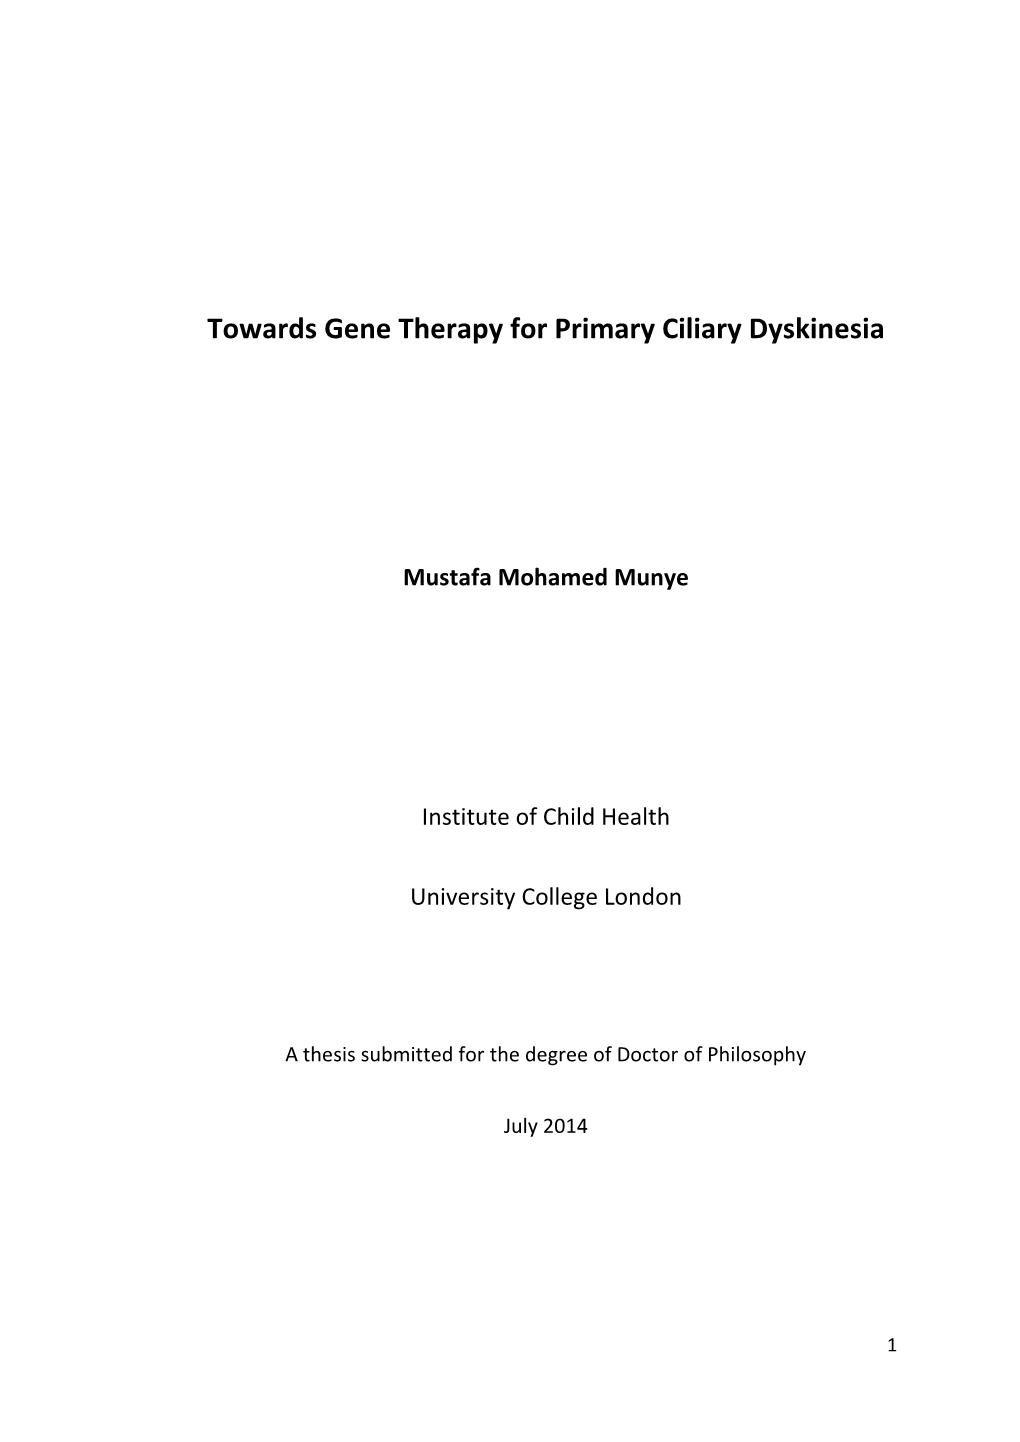 Towards Gene Therapy for Primary Ciliary Dyskinesia